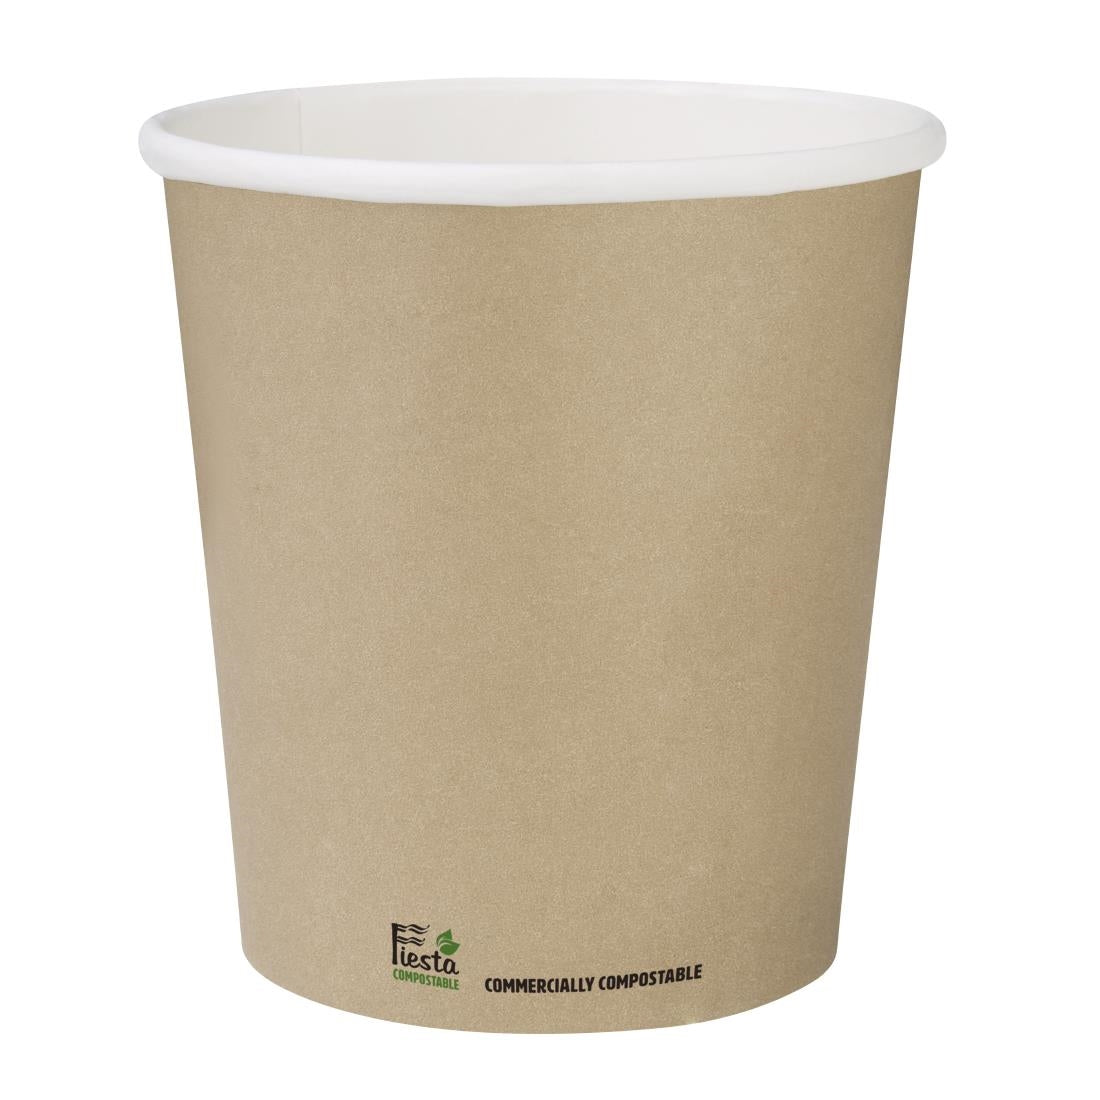 CU981 Fiesta Compostable Coffee Cups Single Wall 8oz (Pack of 50)